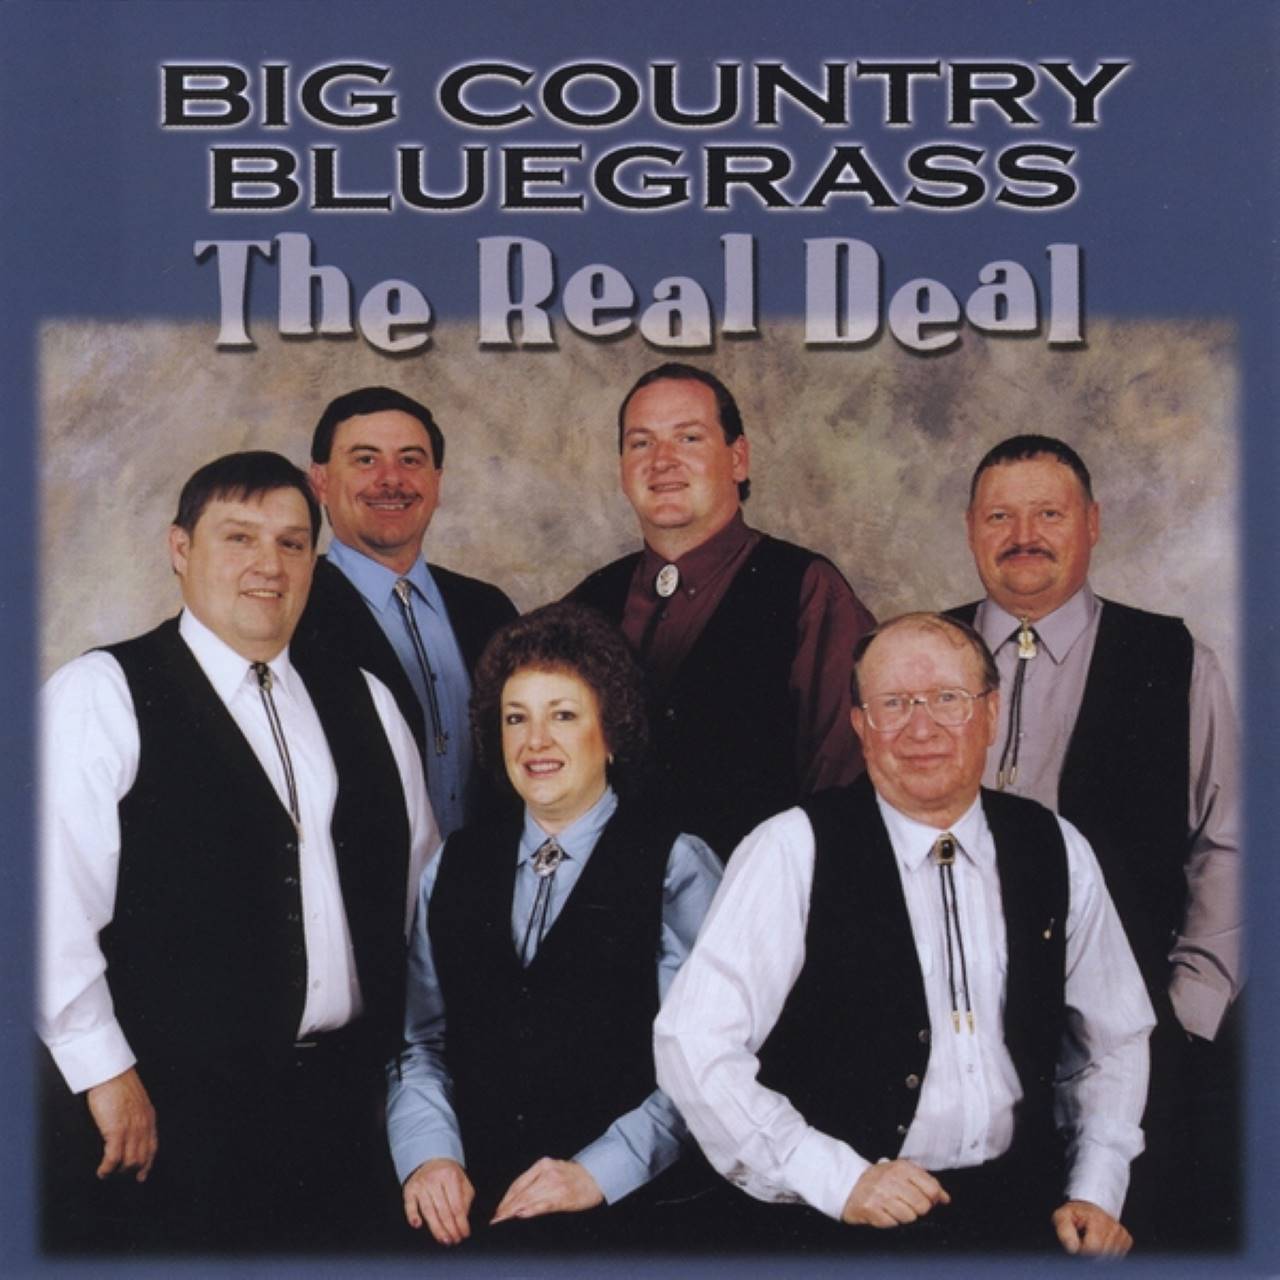 Big Country Bluegrass - The Real Deal cover album